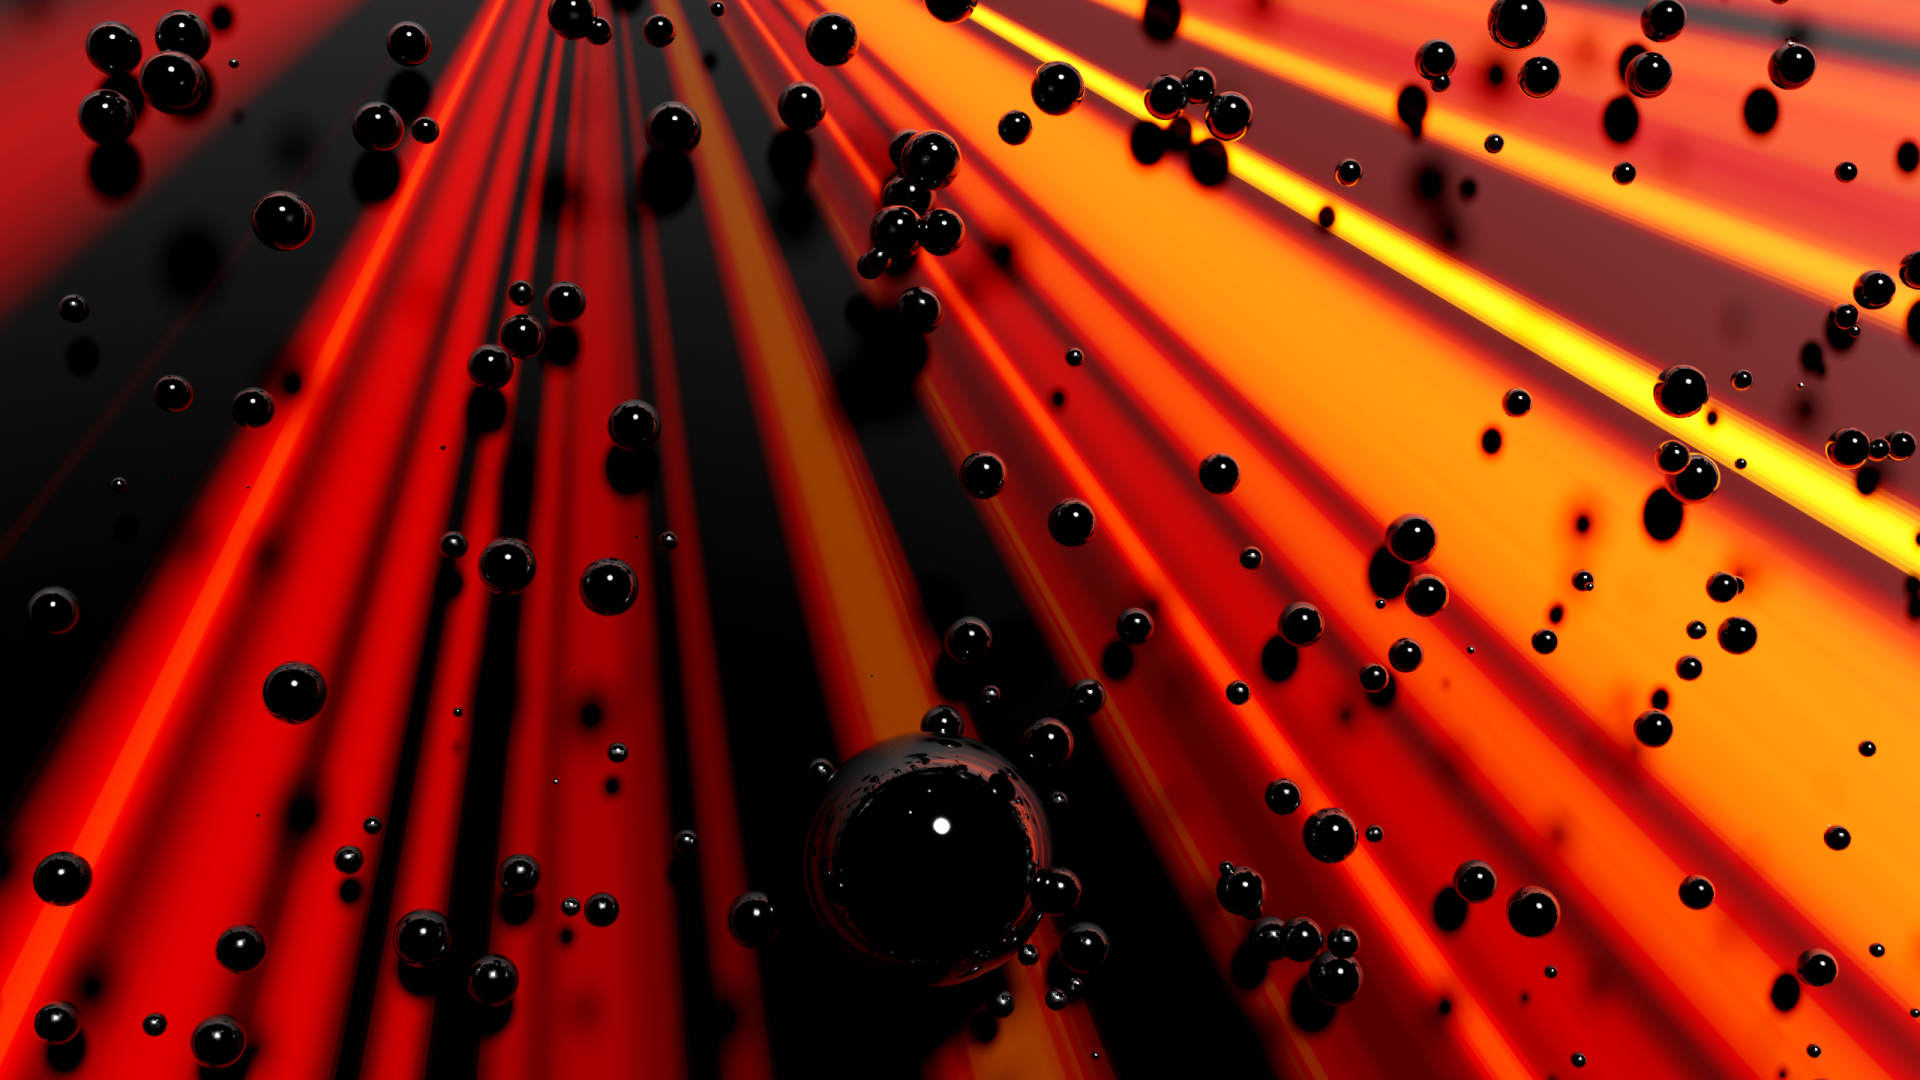 Bubbly Lines 1080p Laptop Full HD Wallpaper Abstract